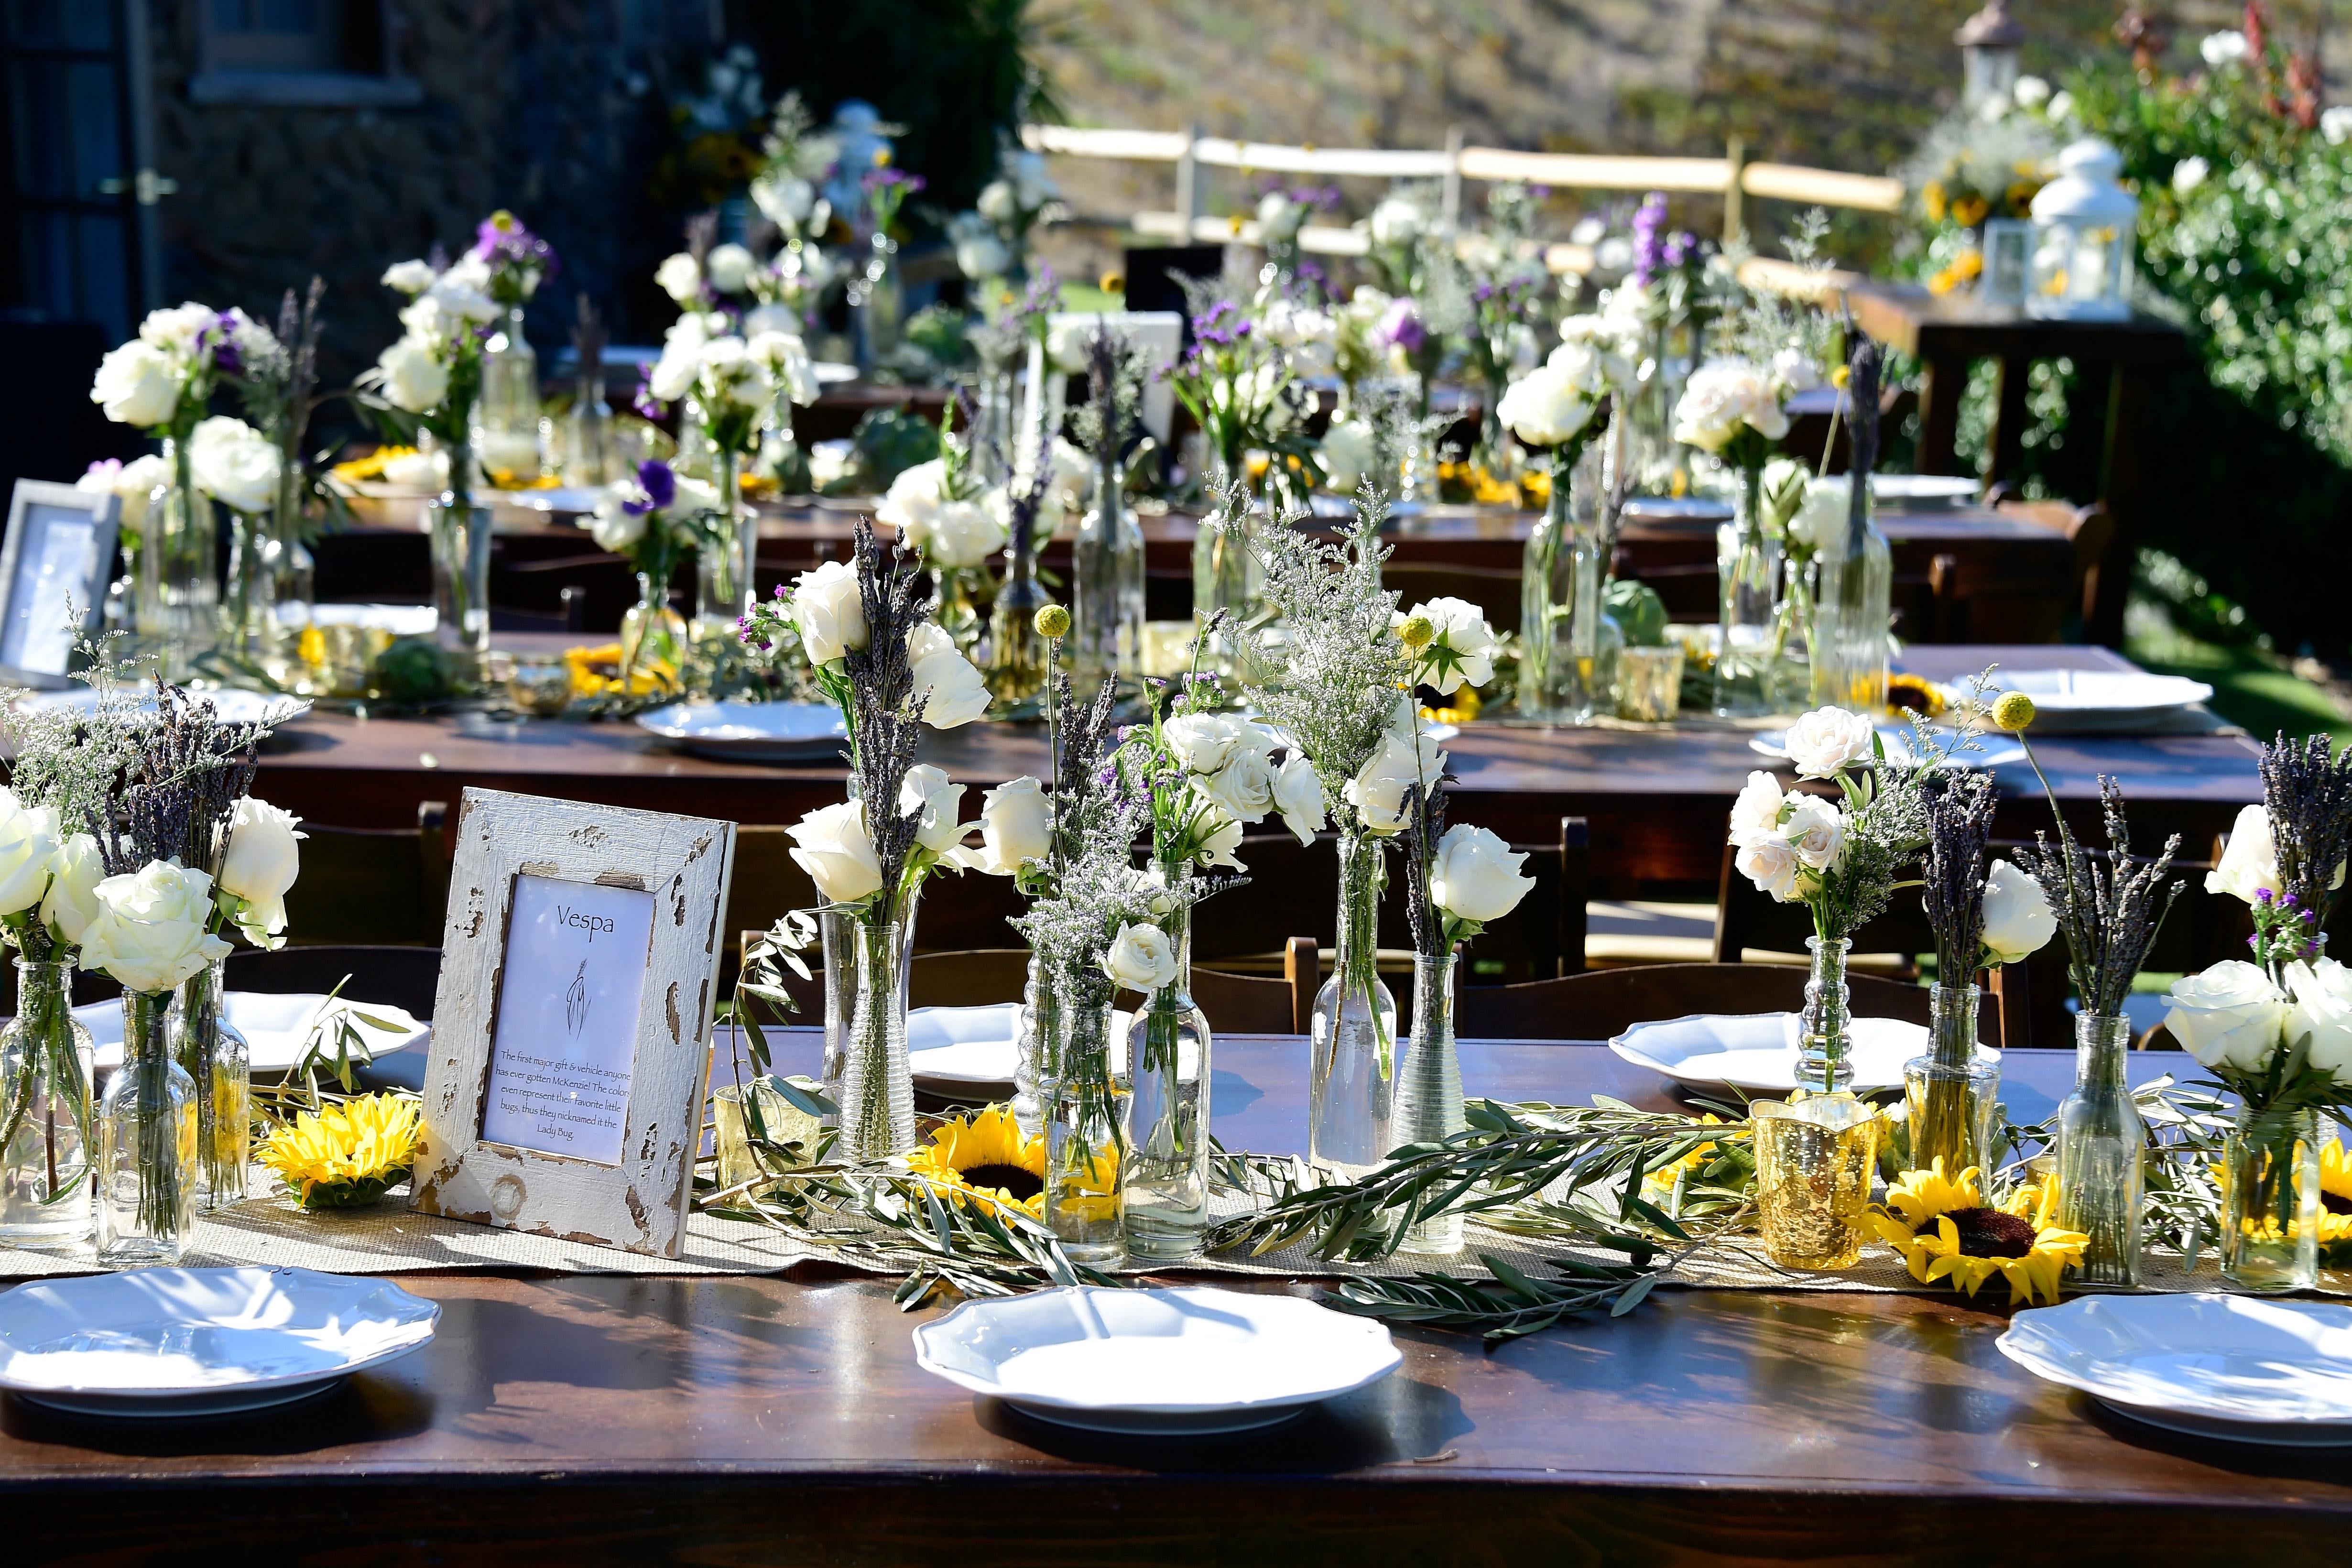 Flowers in vases and porcelain plates sit on dark wooden benches at an outdoor wedding 